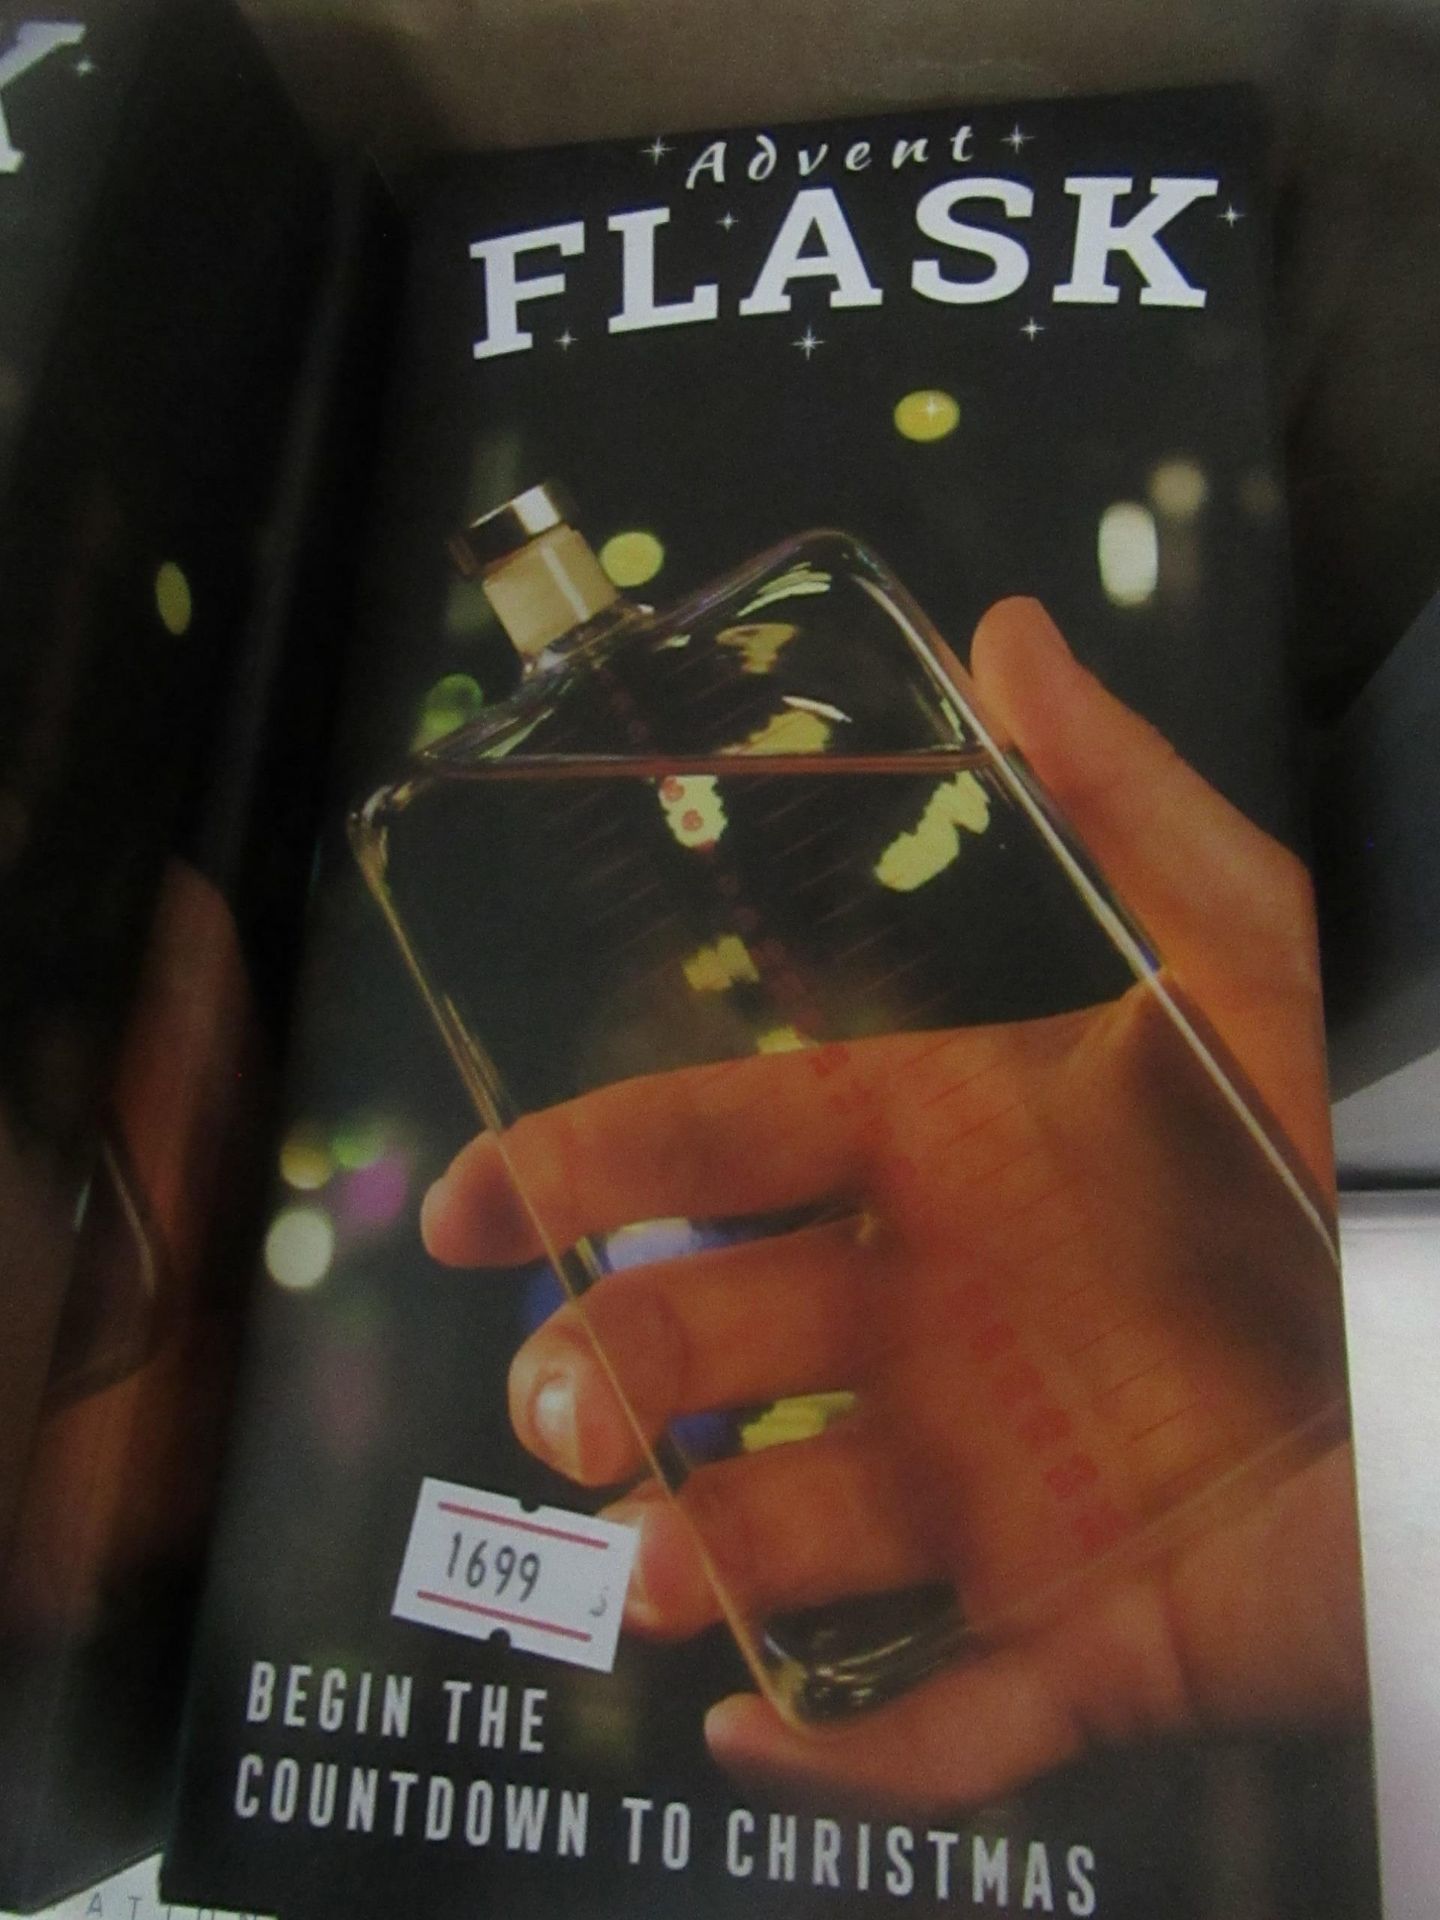 5x Thumbs Up - Advent Flask - Begin The Countdown To Christmas - Unchecked & Boxed.